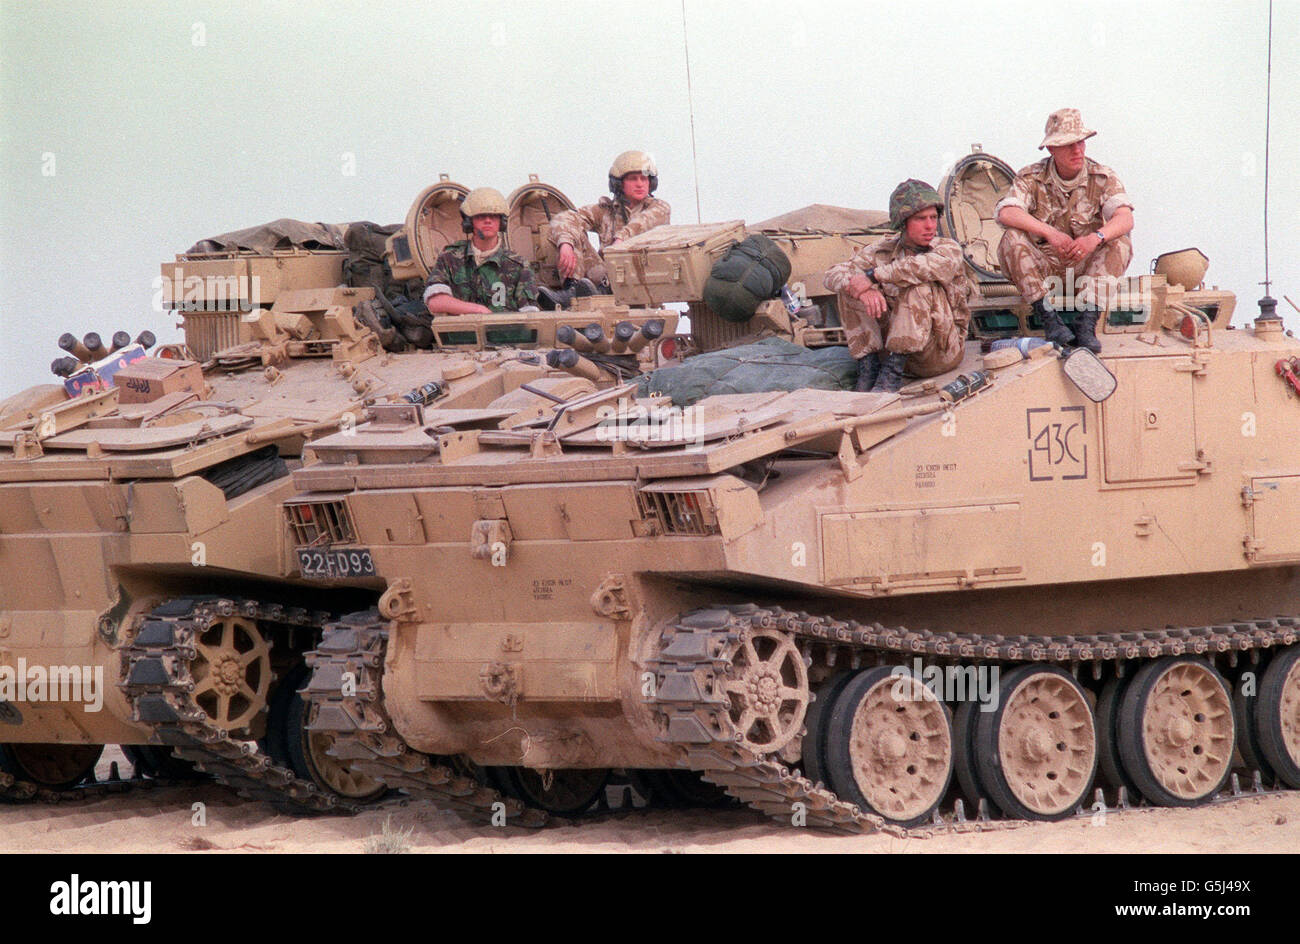 THE GULF WAR: Soldiers of the Royal Engineers of 1st Armoured Division take a break on their combat engine tractors, used for searching out land mines, in the Gulf. Stock Photo